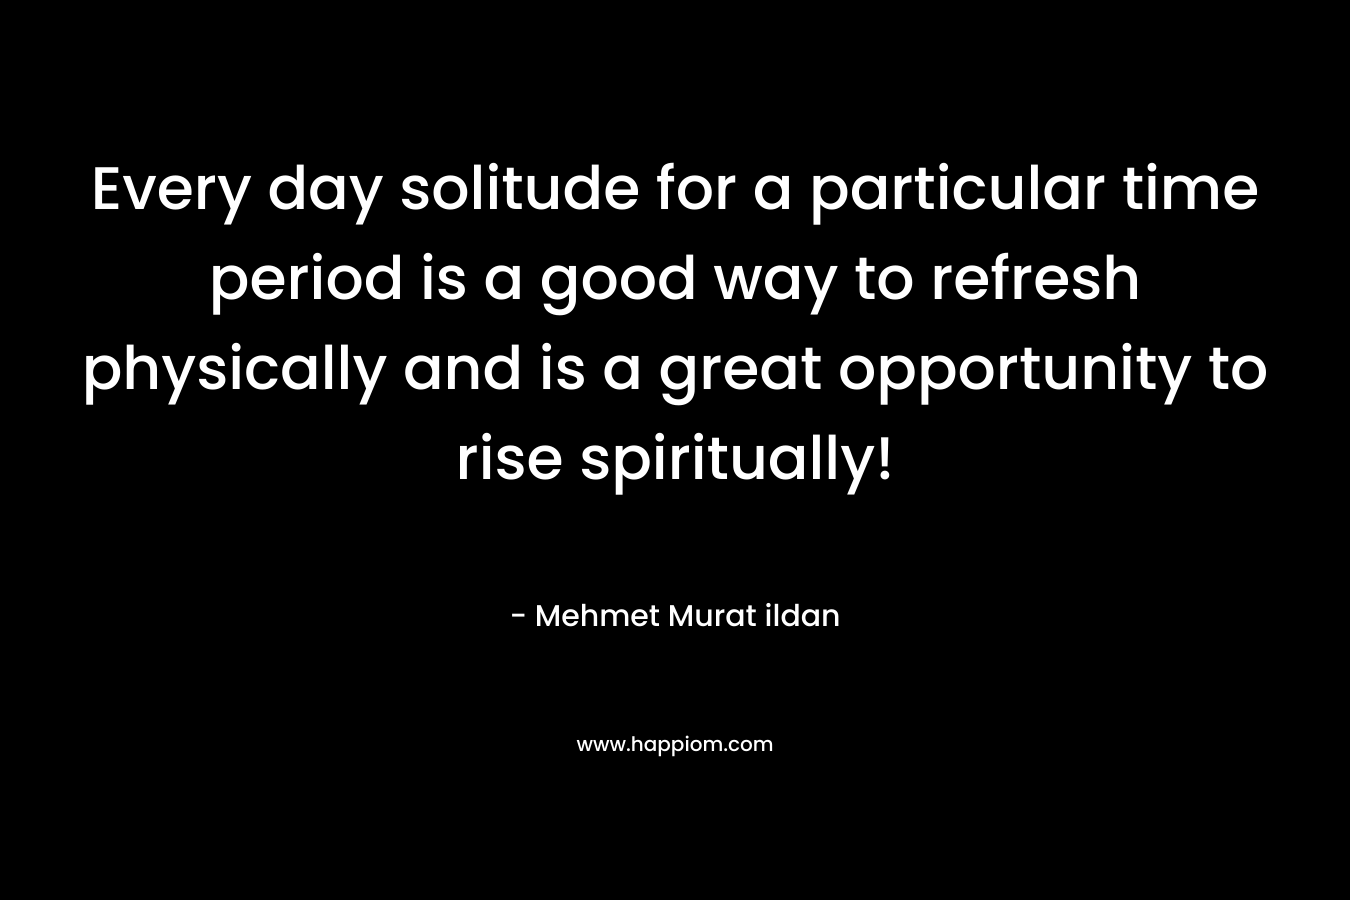 Every day solitude for a particular time period is a good way to refresh physically and is a great opportunity to rise spiritually! – Mehmet Murat ildan